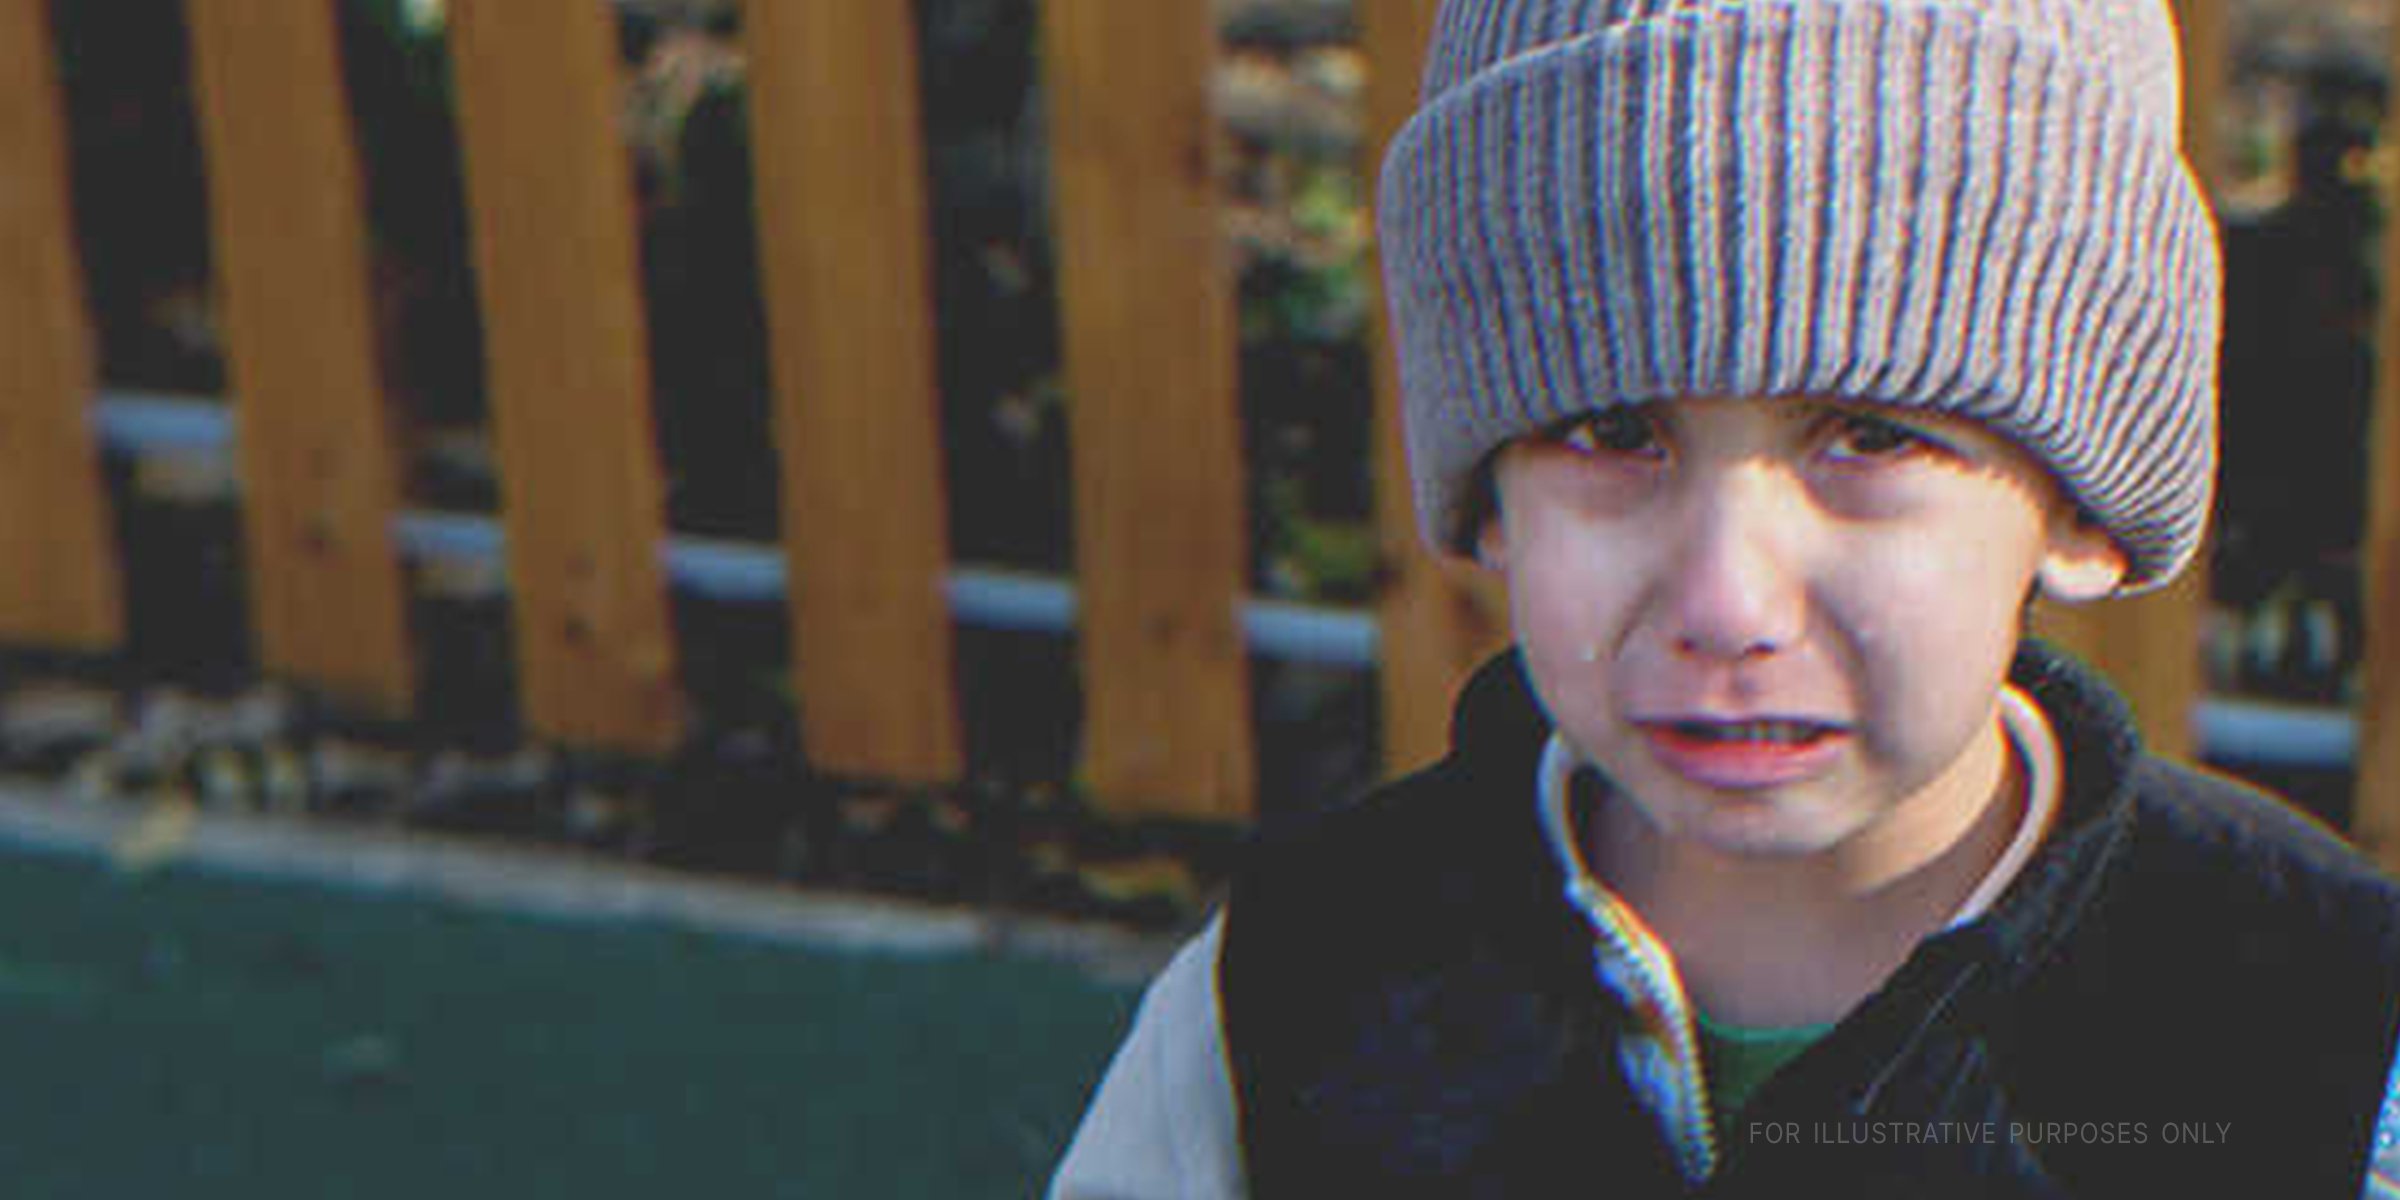 Young boy crying | Source: Shutterstock